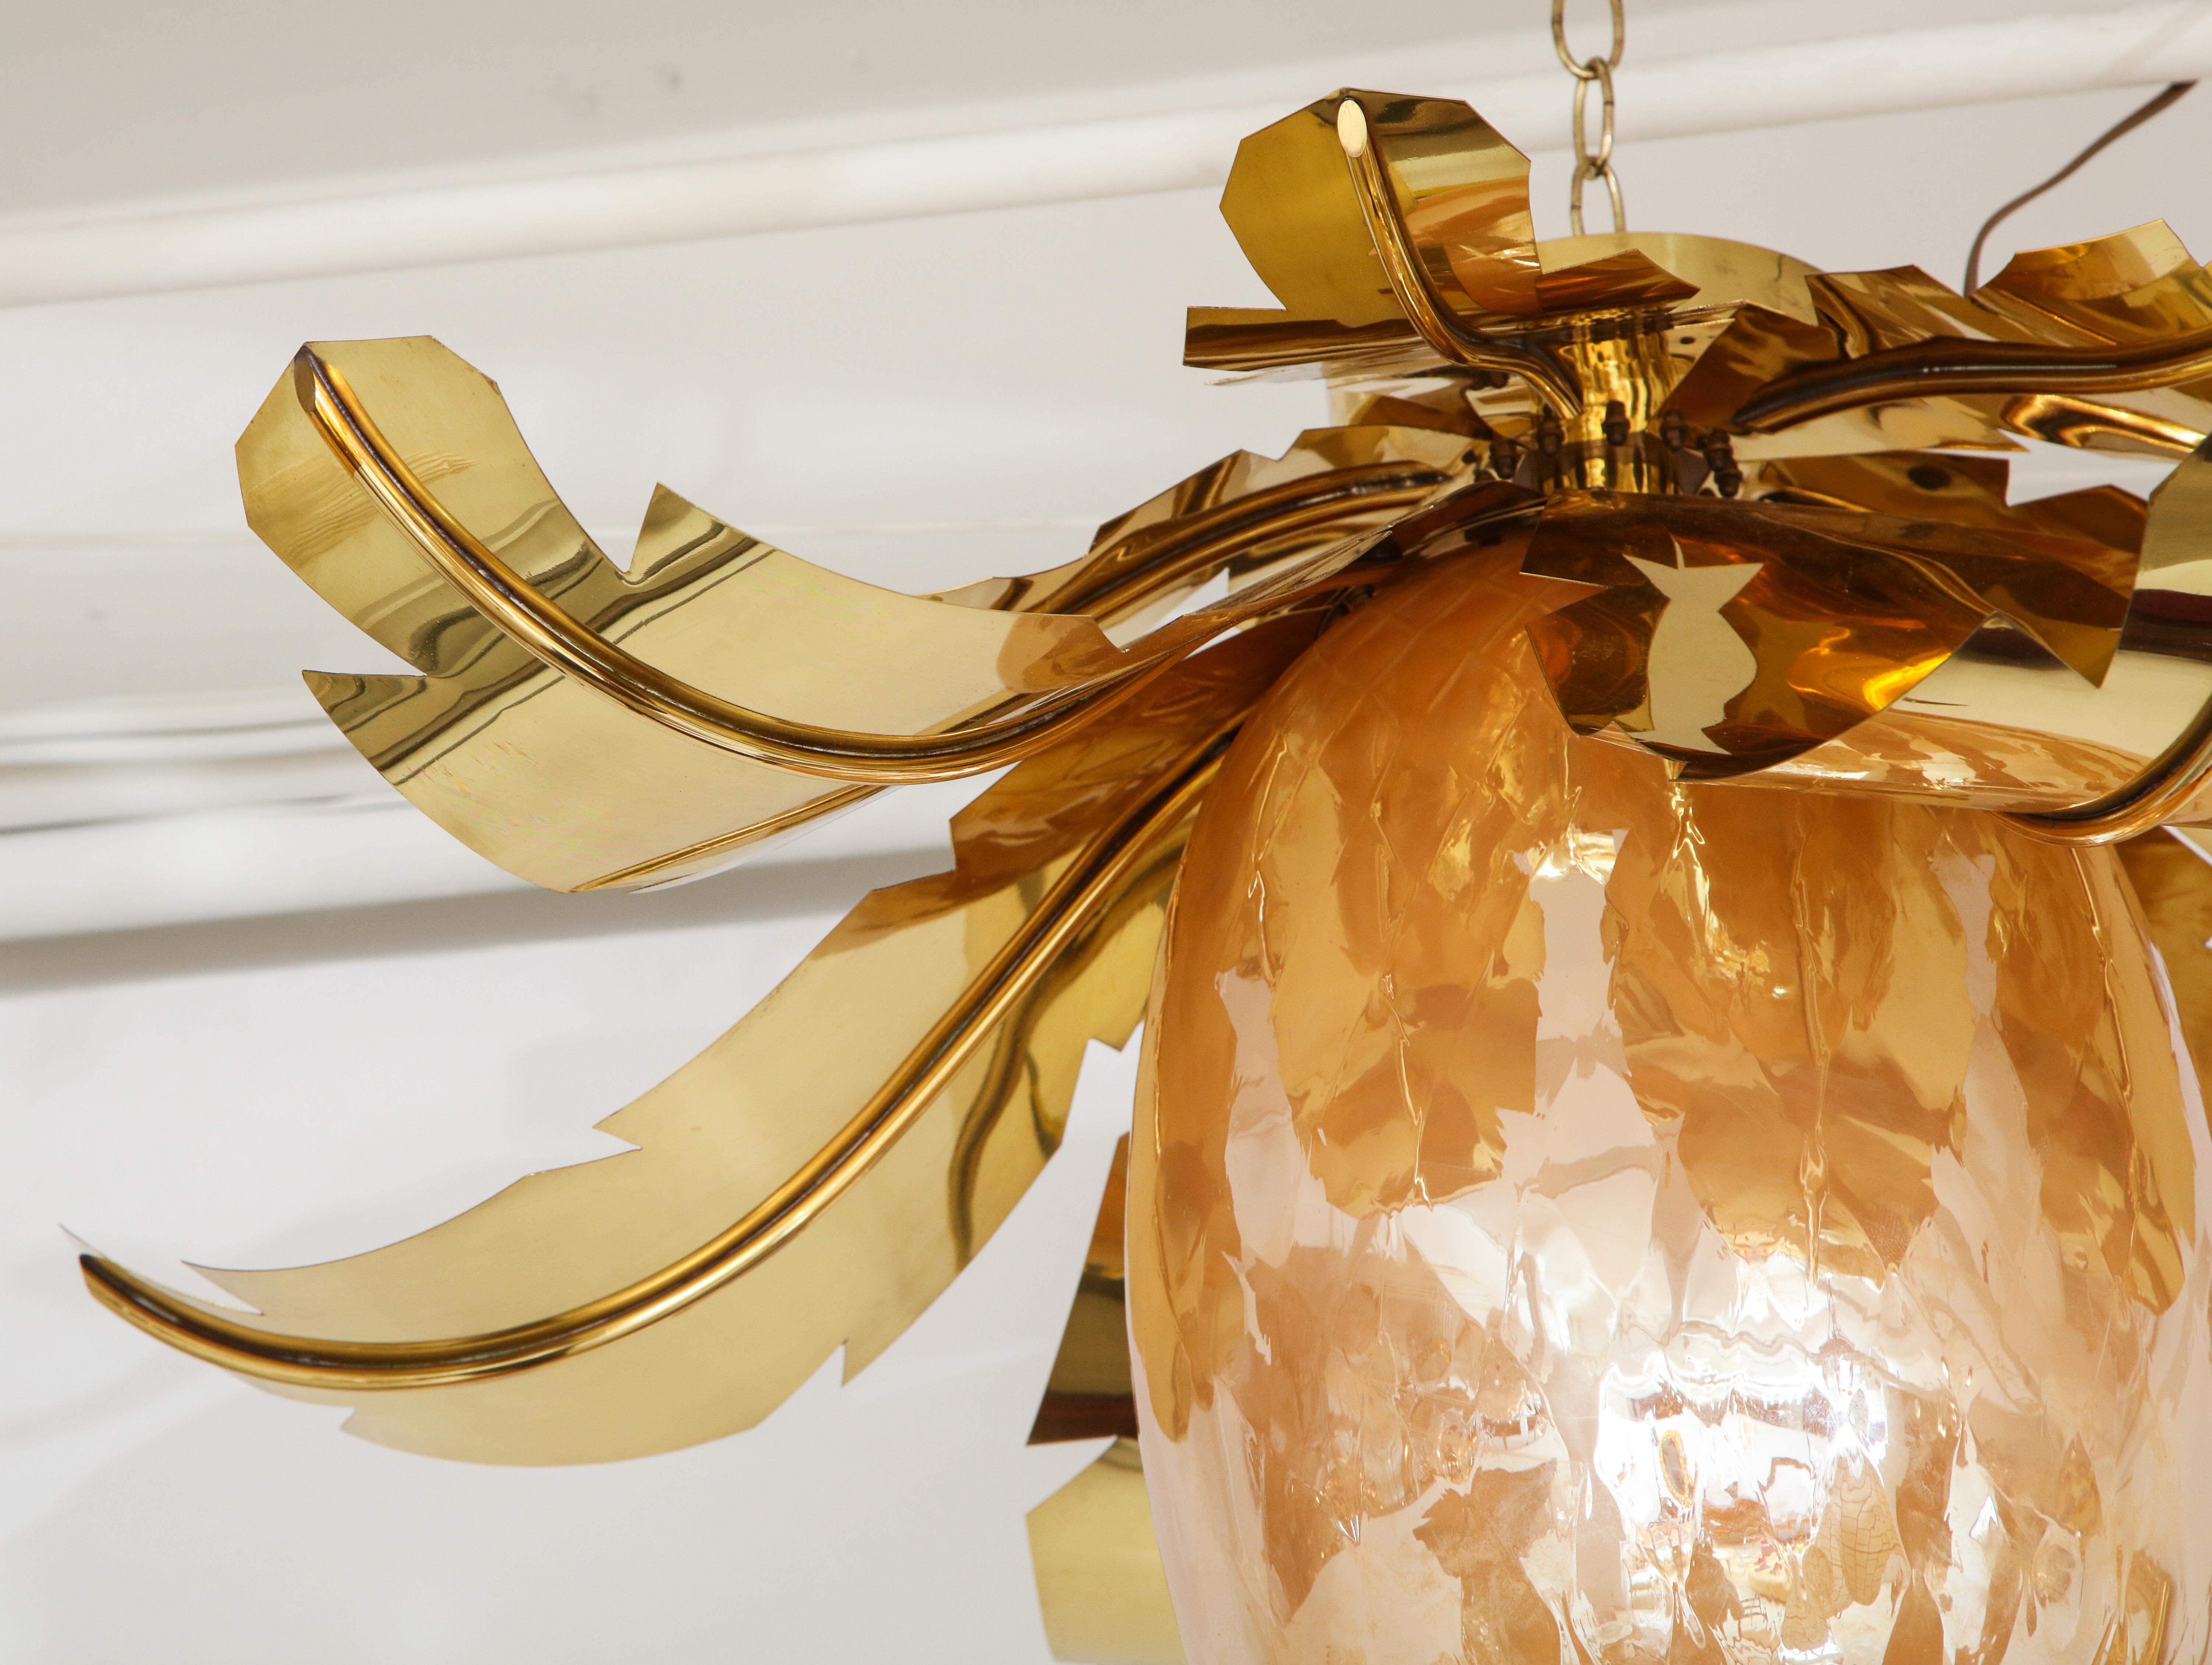 Pair of Venetian Peach Glass and Brass Leaves Pendant Chandeliers For Sale 7